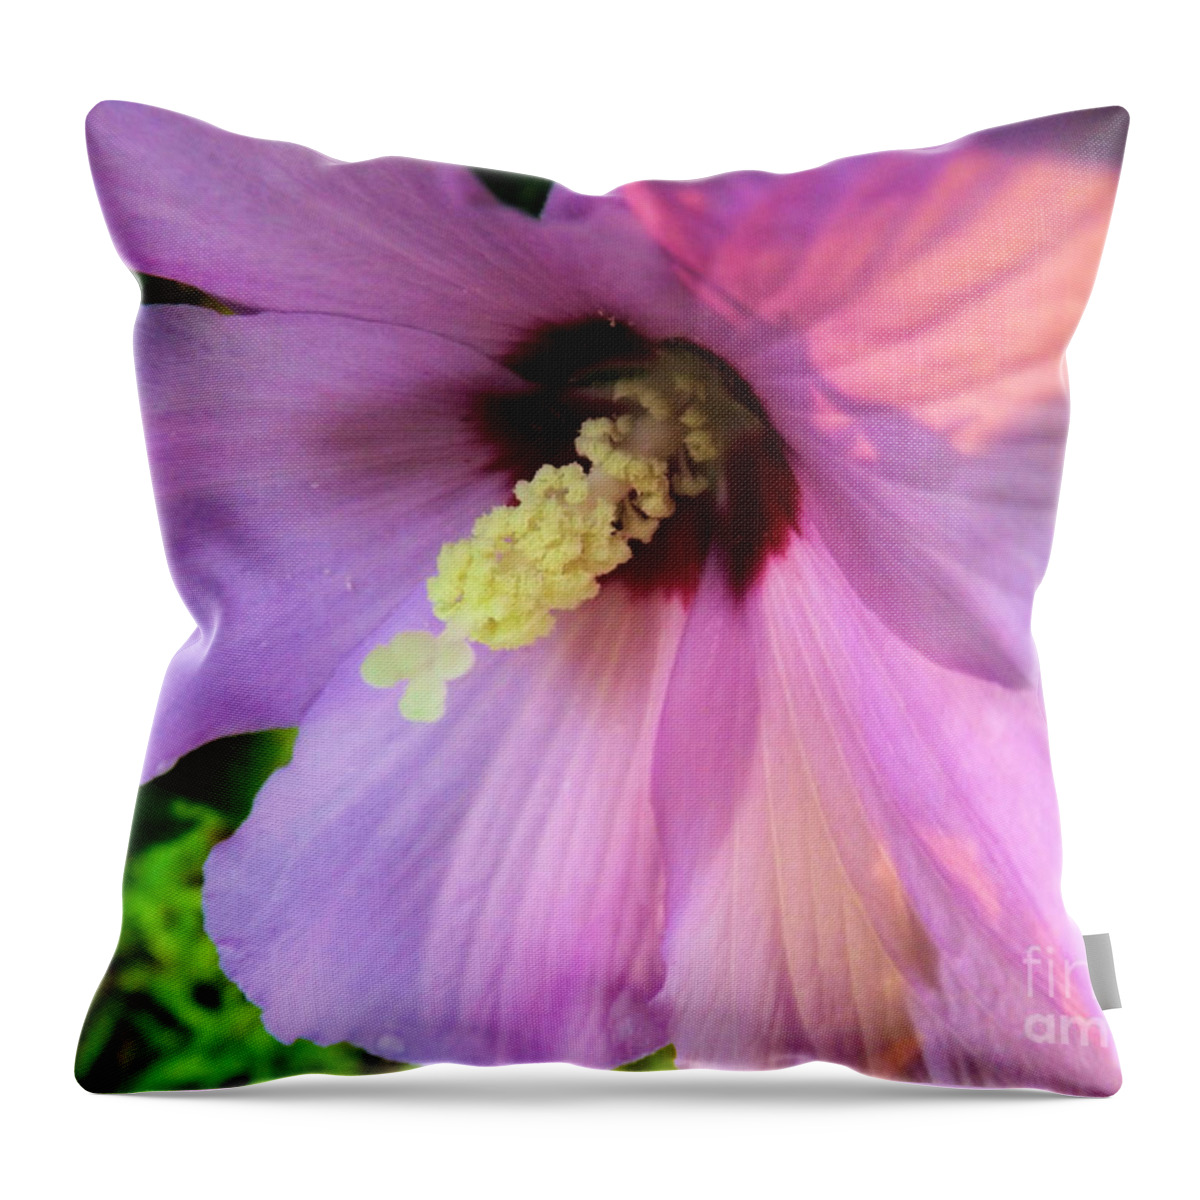 Purple Throw Pillow featuring the photograph Morning Glory by Robyn King